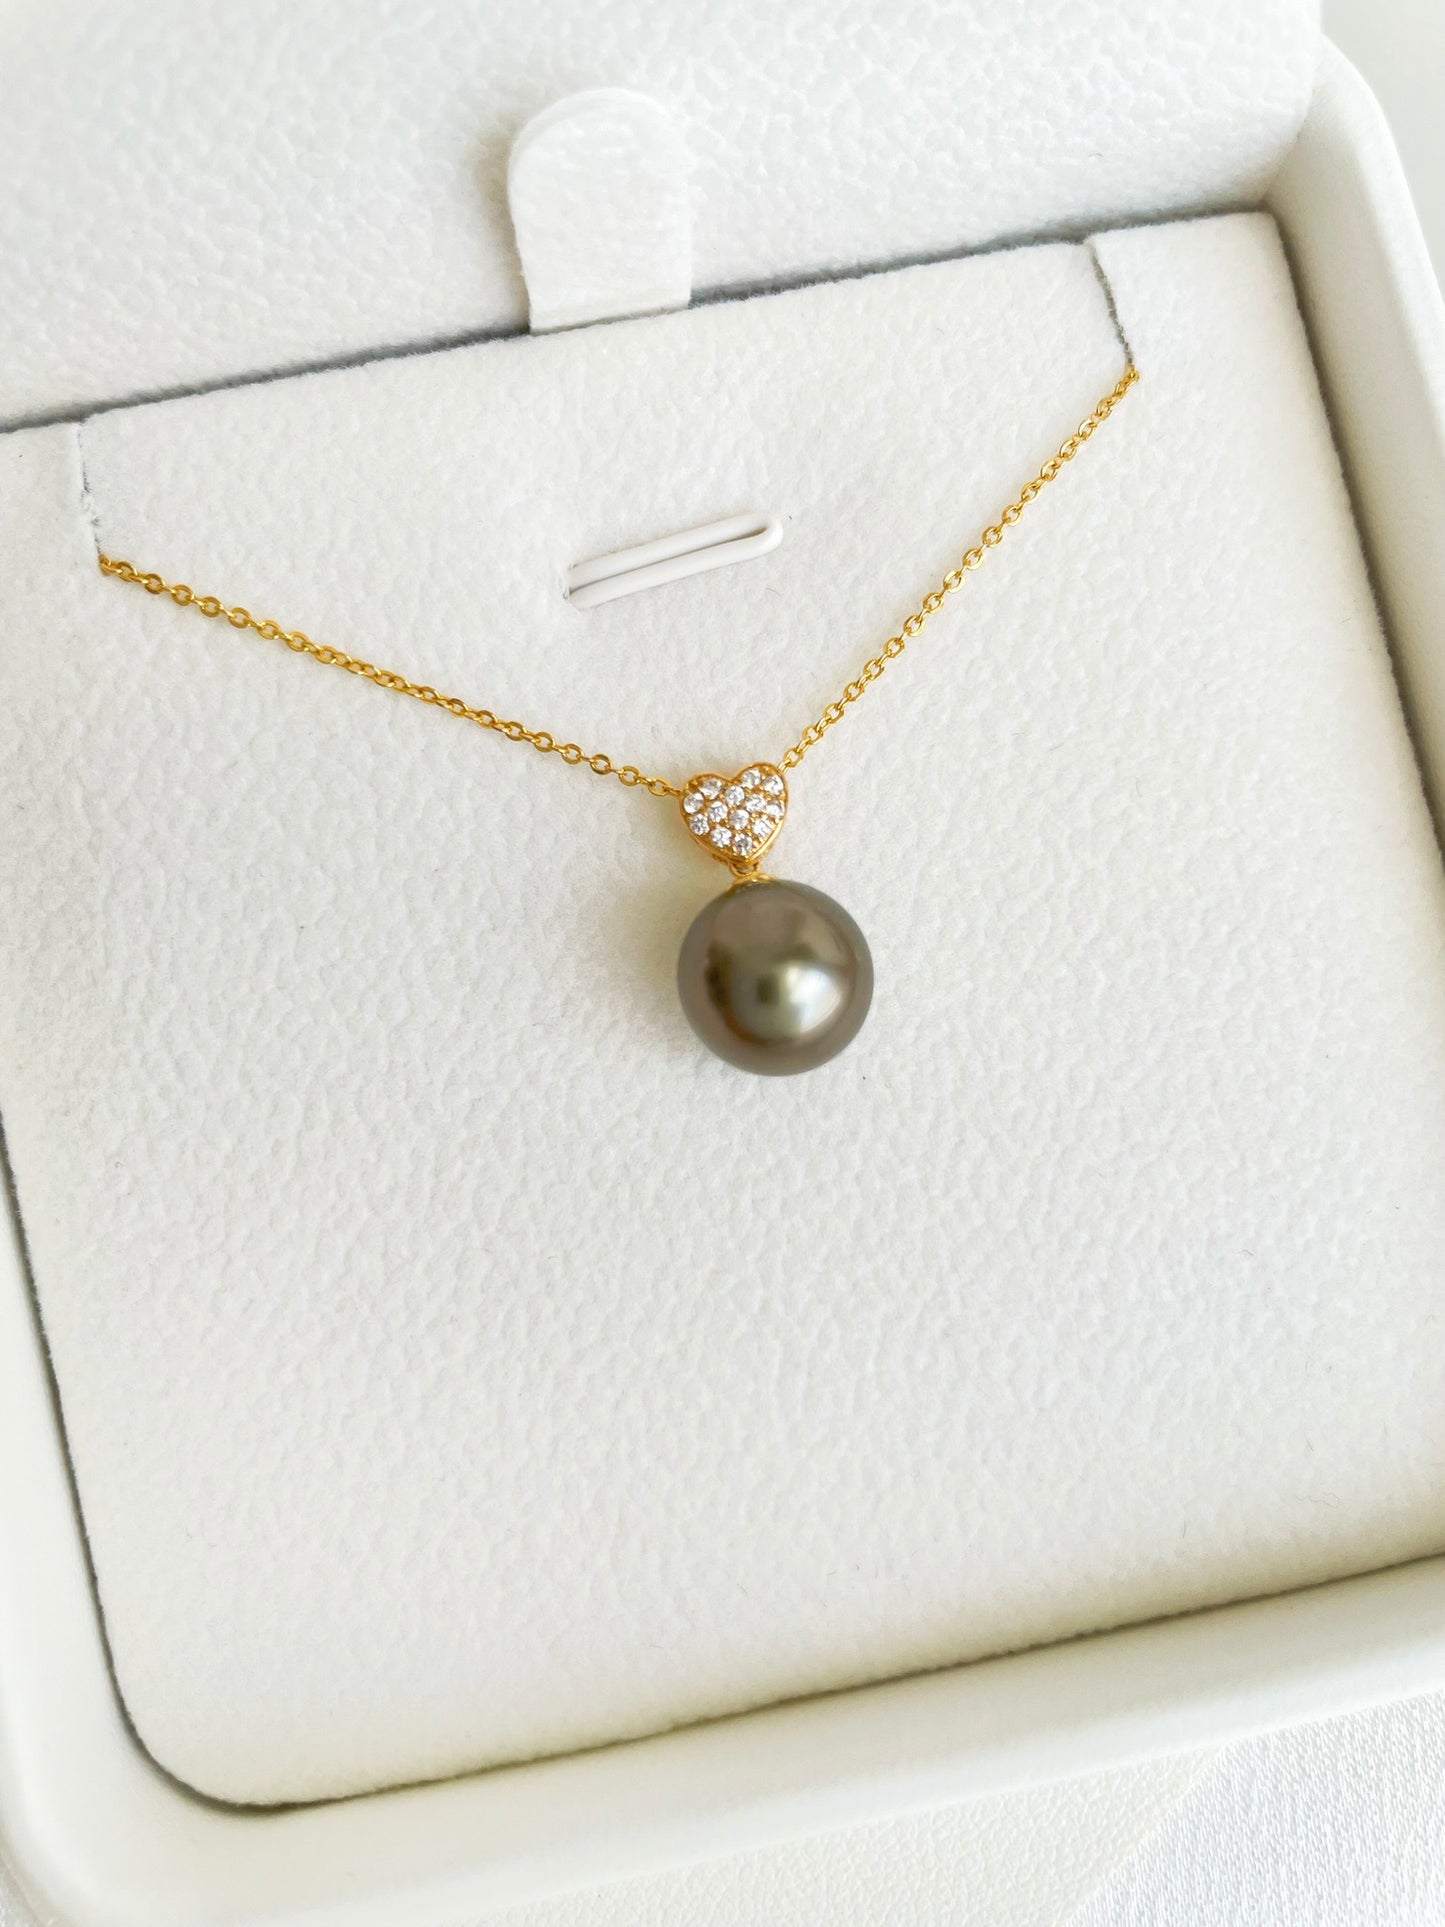 10-10.5mm Tahitian Pearl Necklace in 18k Gold